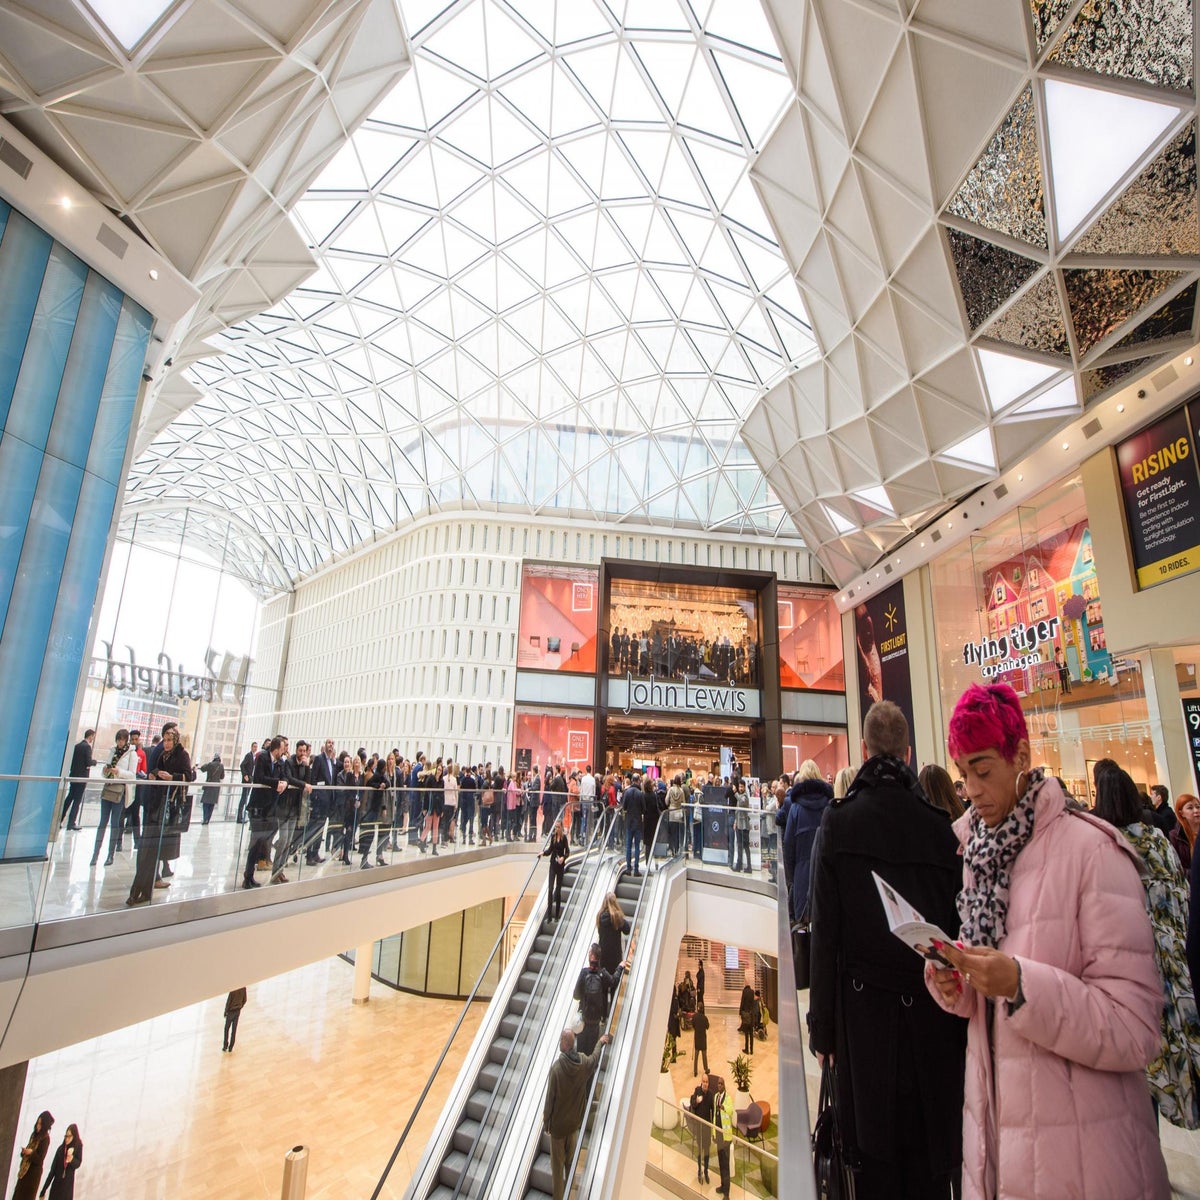 Westfield lifts the lid on Europe's biggest retail project